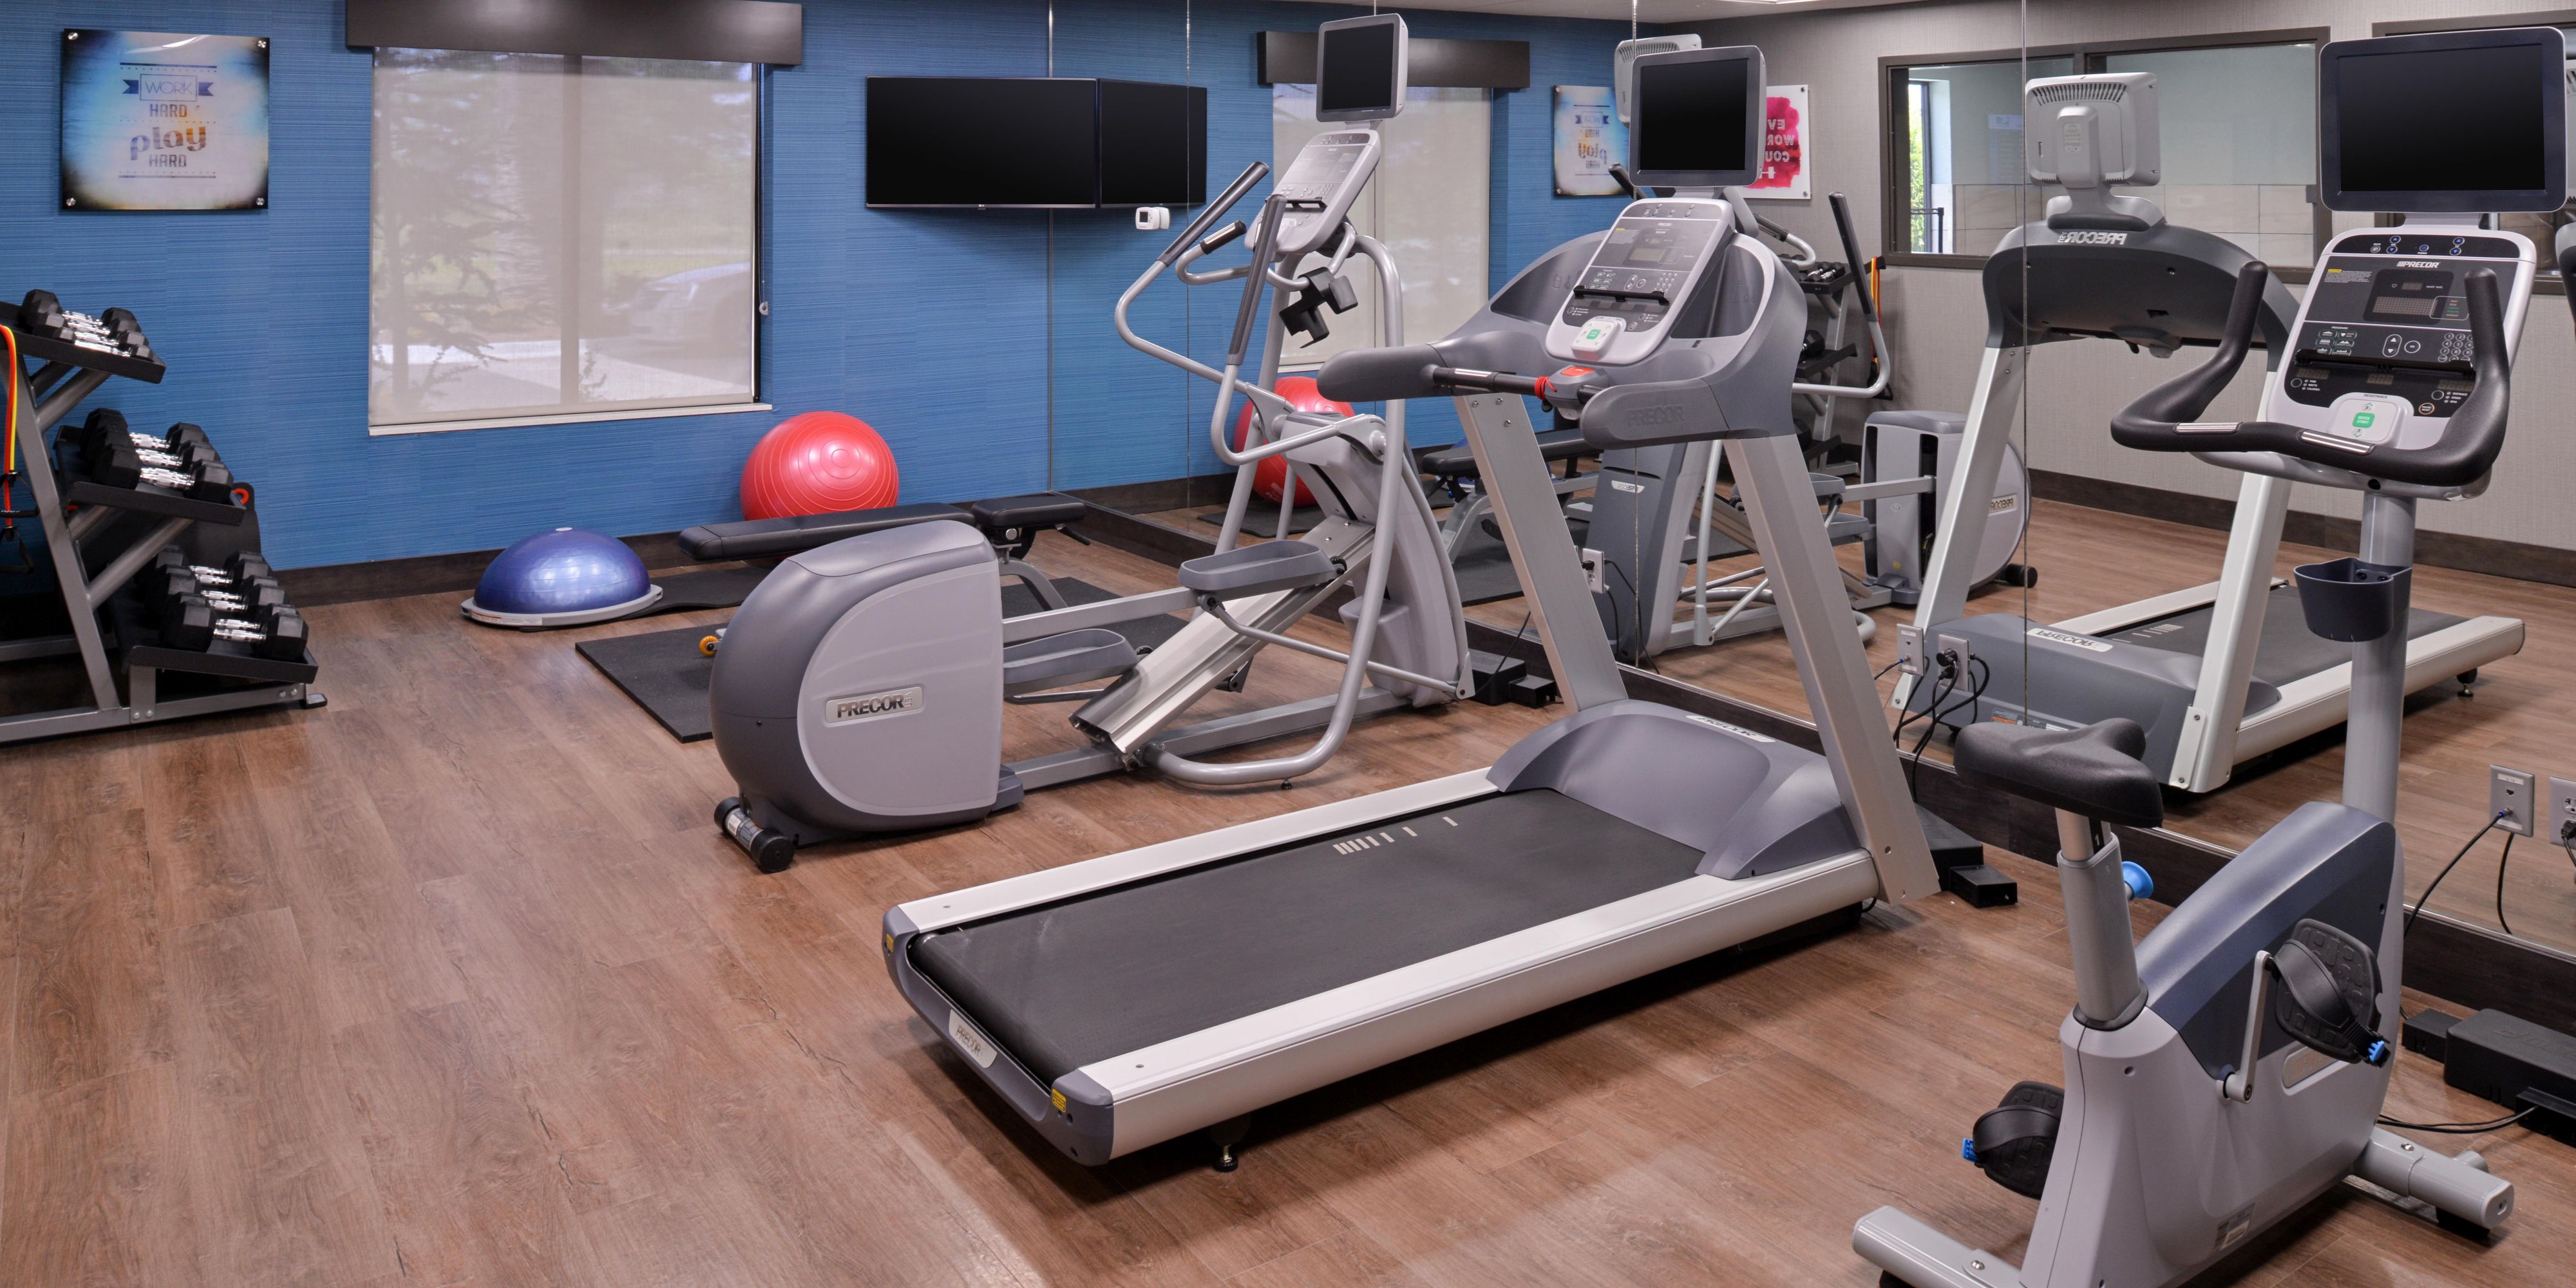 Maintaining your routine while traveling is important, especially when you’re short on time and on the go. We get it. The right workout—right when you want it—helps you stay focused, energized and on top of your game. So, recharge and feel ready for anything in our fitness center.